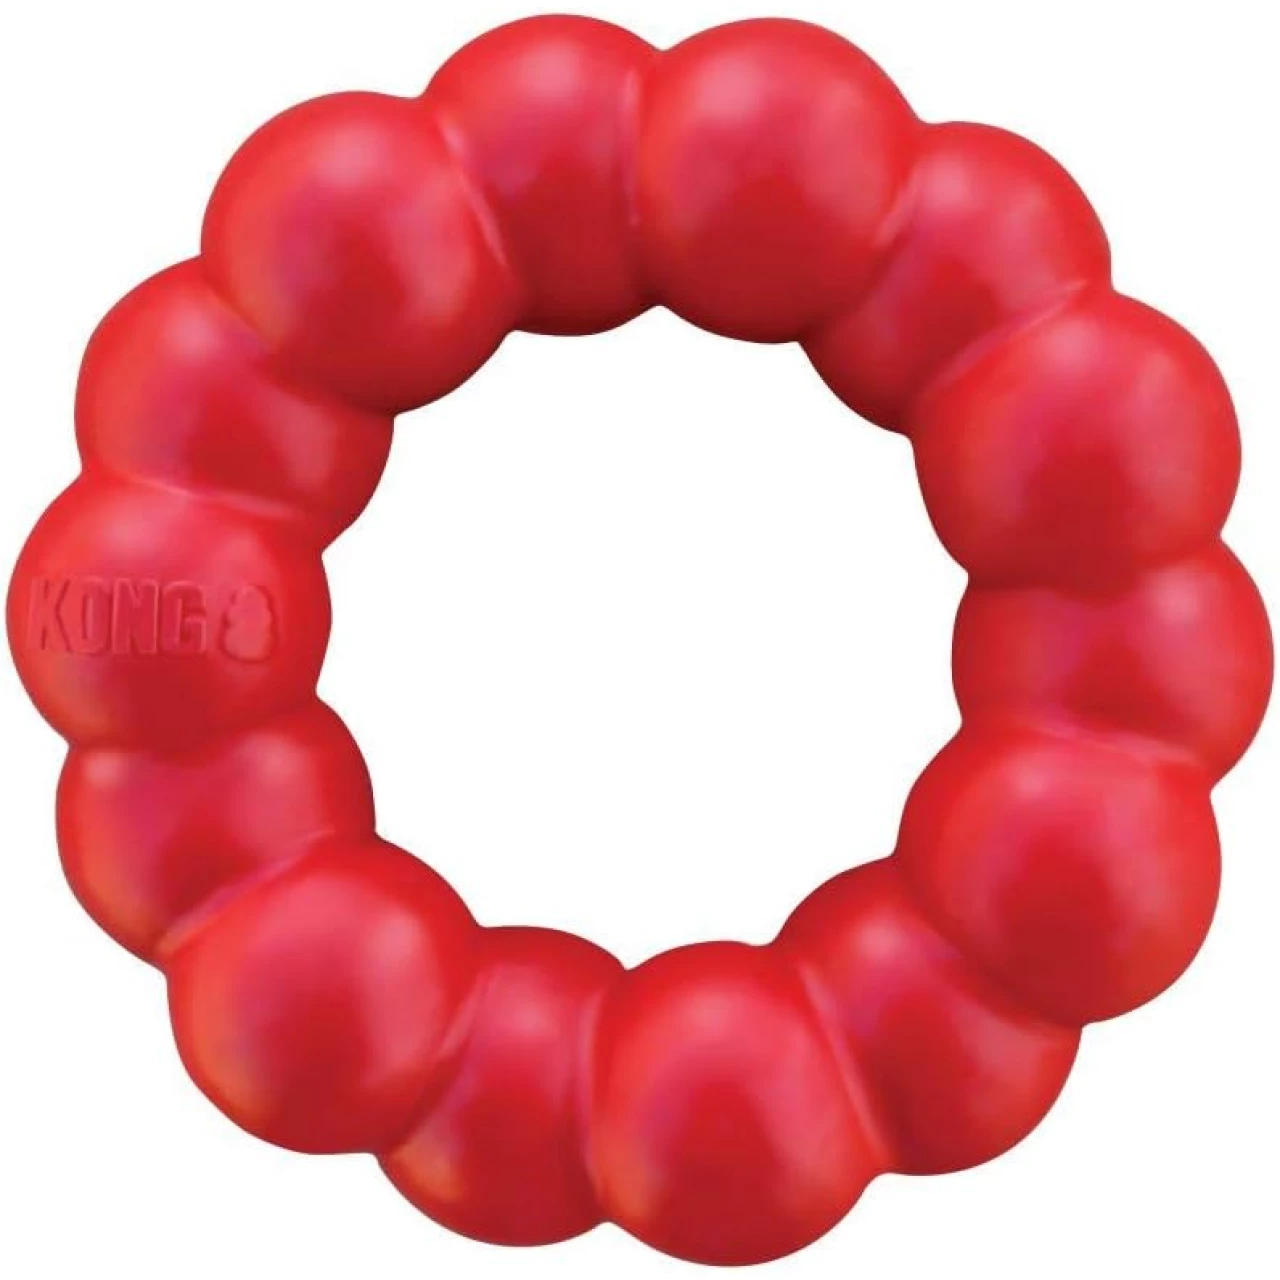 KONG Ring - Tough Dog Toy for Aggressive Chewers - Rubber Dog Ring Chew Toy - Dog Dental Toy to Support Healthy Teeth &amp; Gums